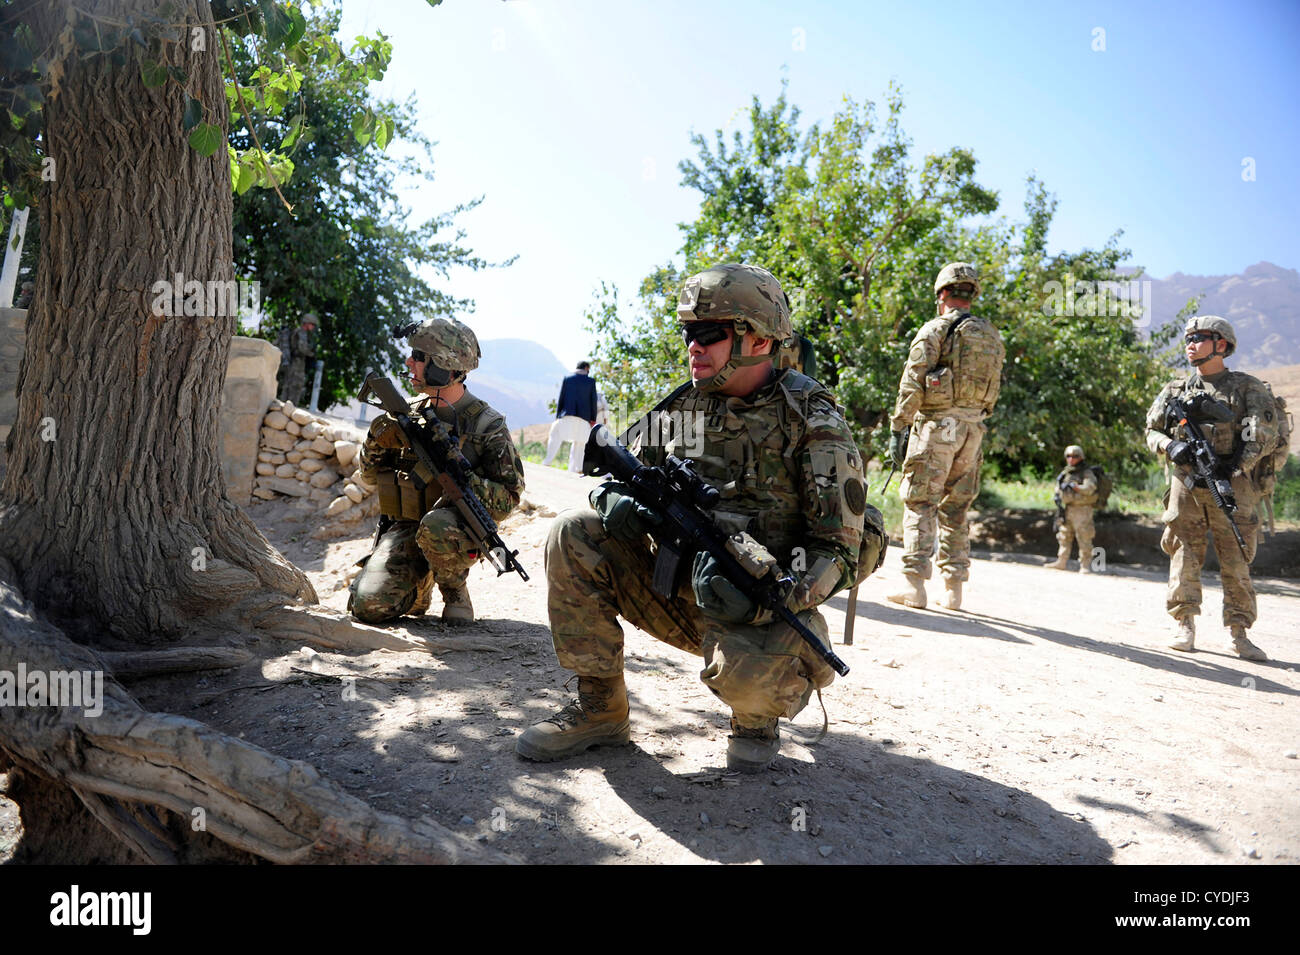 US soldiers patrol a village September 26, 2012 in Pur Chaman district, Farah province, Afghanistan. The Provincial Reconstruction Team Farah marks the first time coalition forces have been to the Pur Chaman district in over a year. Stock Photo